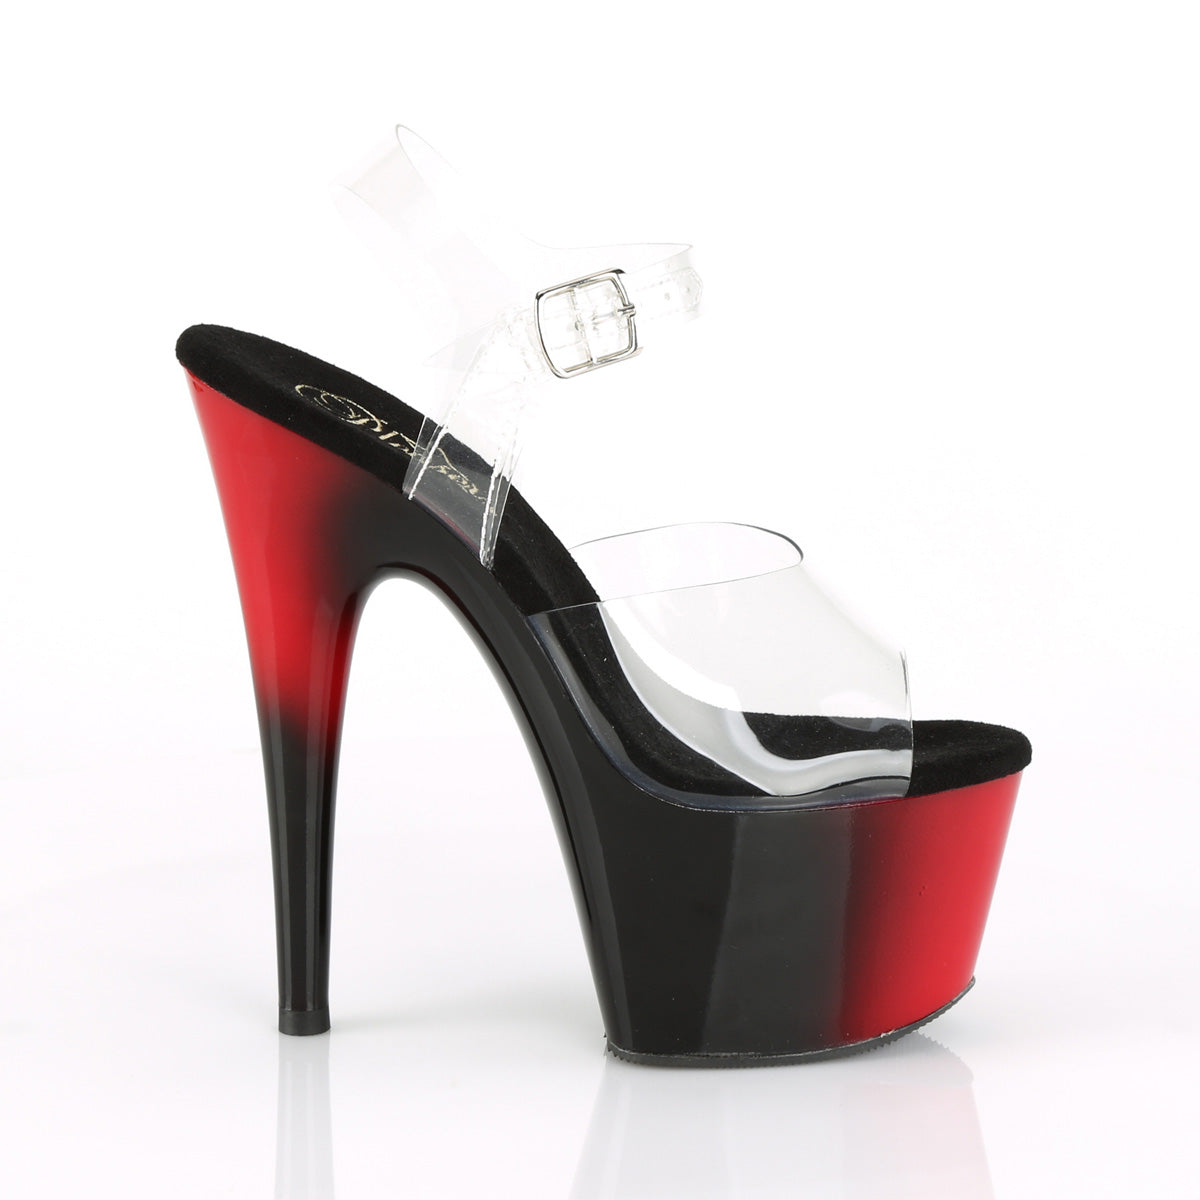 ADORE-708BR 7" Heel Clear/Red-Black Pole Dancer Shoes-Pleaser- Sexy Shoes Fetish Heels